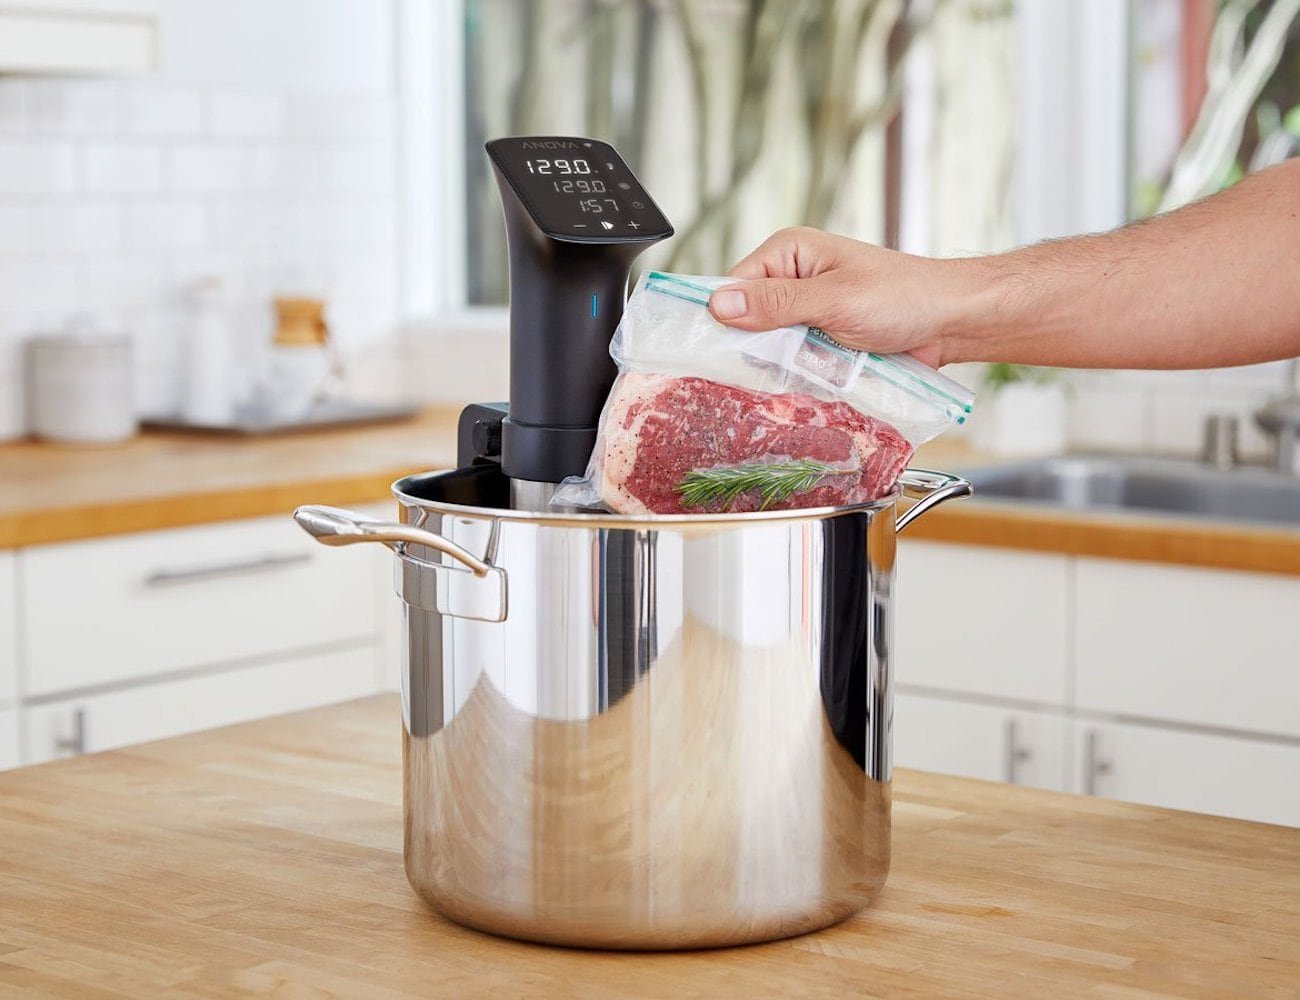 Anova Precision Cooker Pro sous vide device works for 10,000 hours nonstop